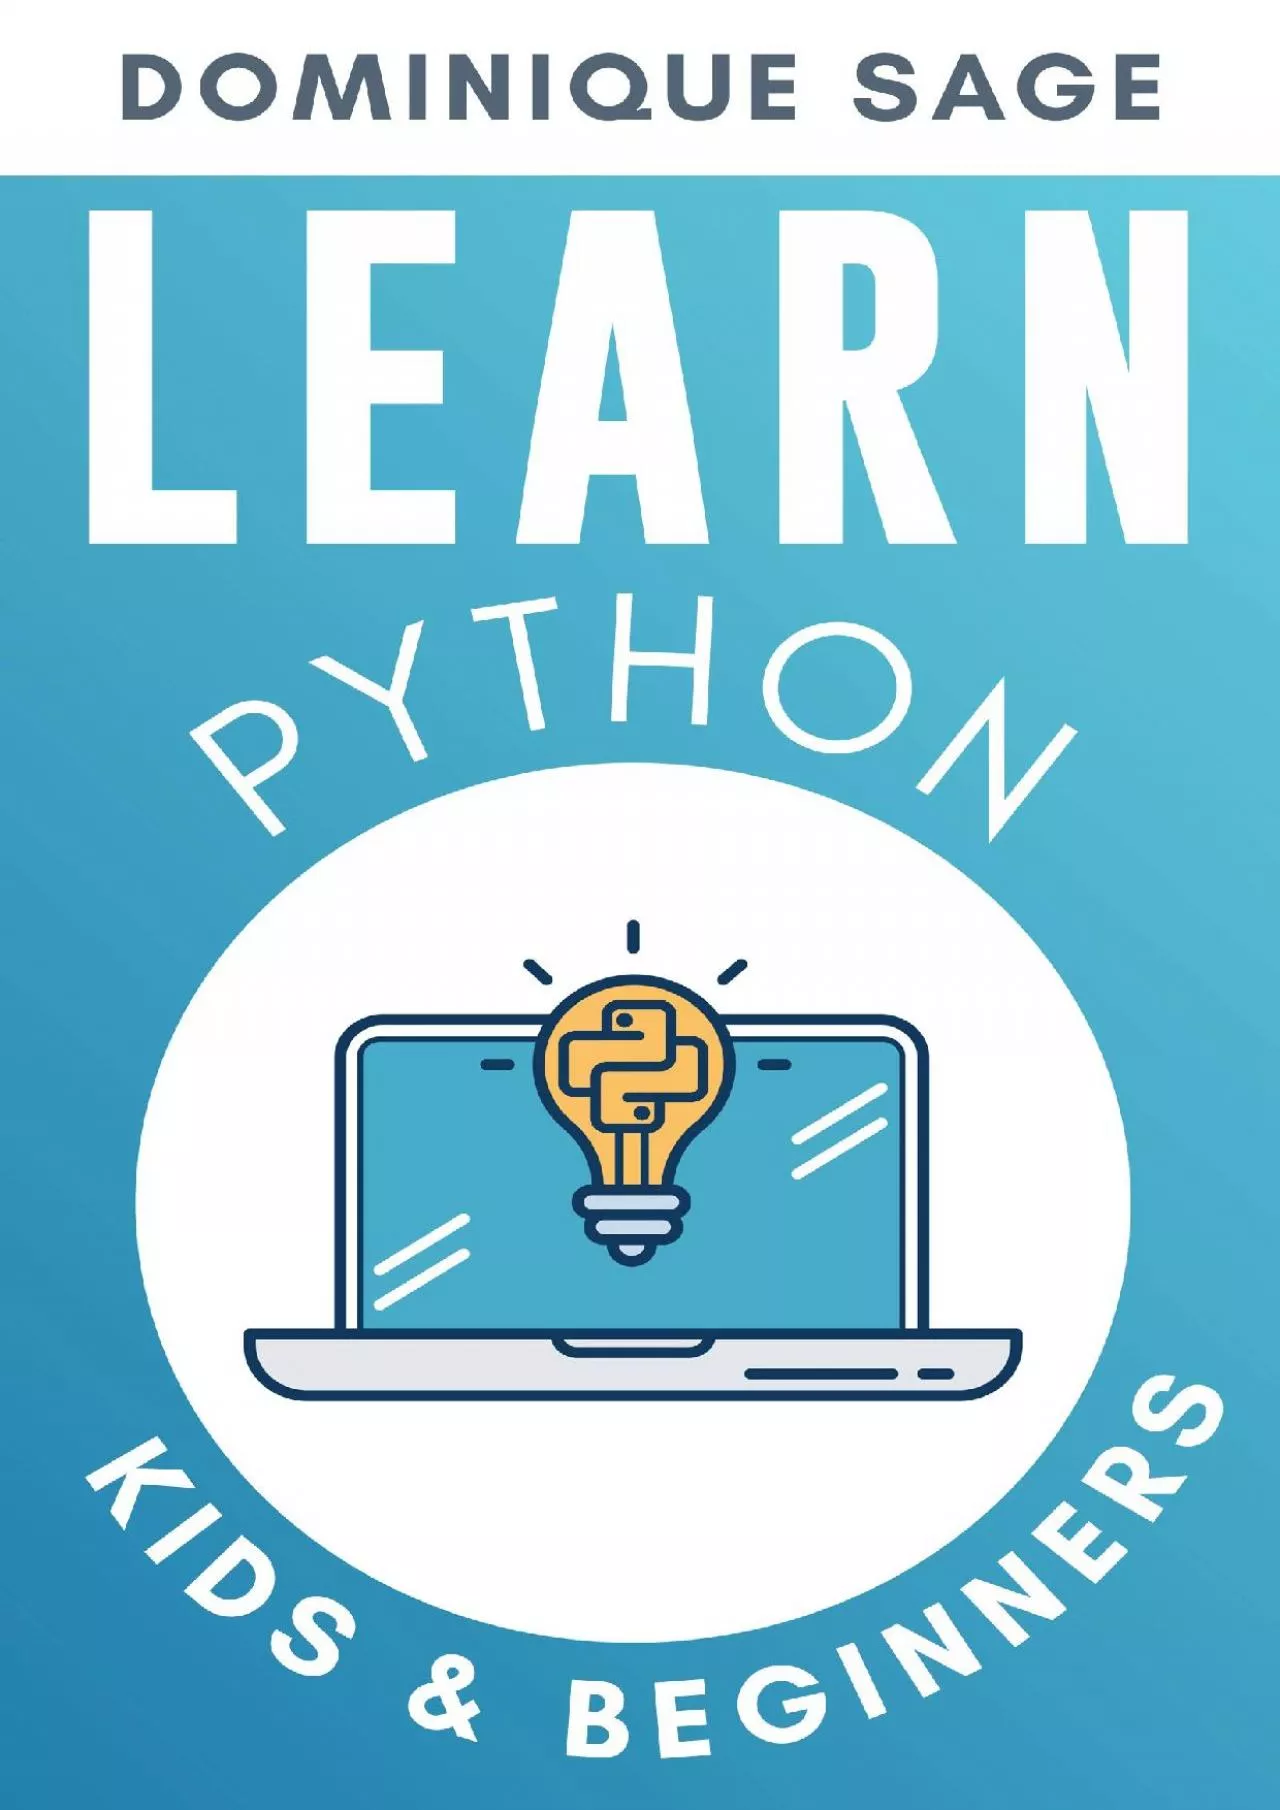 [FREE]-LEARN Python KIDS & BEGINNERS. Python for BEGINNERS with Hands-on Fun Project &